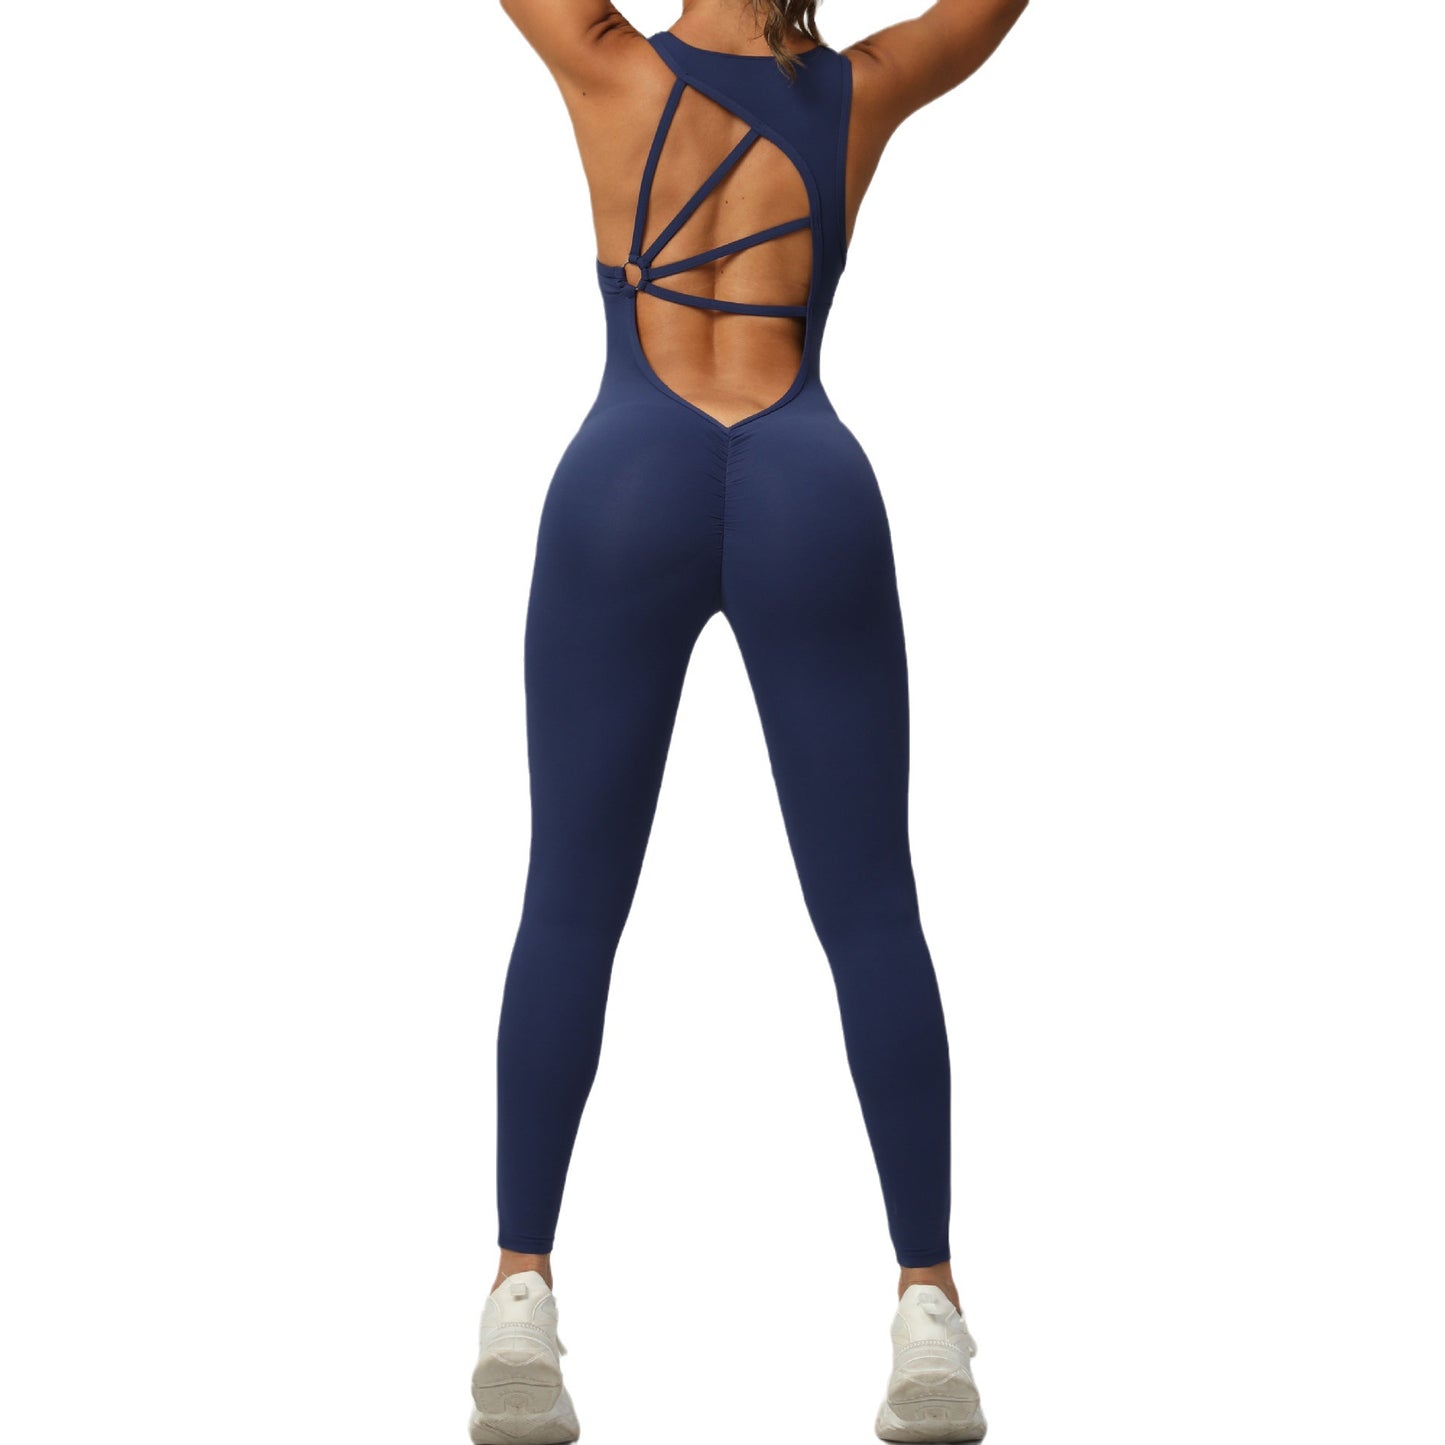 Jumpsuit Women's One-piece  Sleeveless Workout Clothes